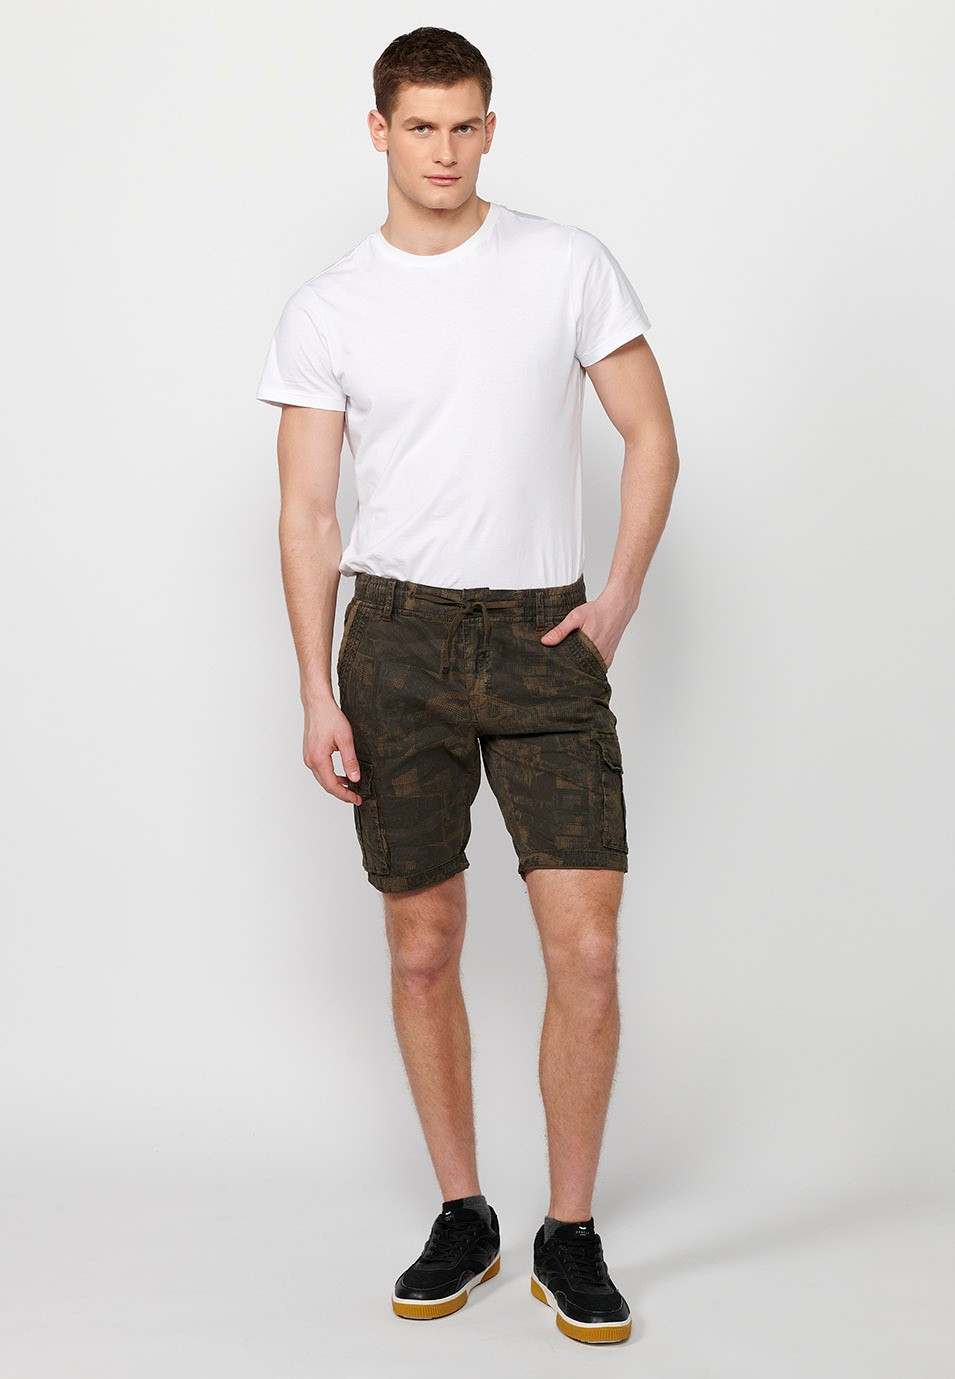 Cargo shorts with front closure with zipper and button and four pockets, two rear pockets with flap with two cargo pockets with flap and adjustable waist with drawstring in Khaki color for men